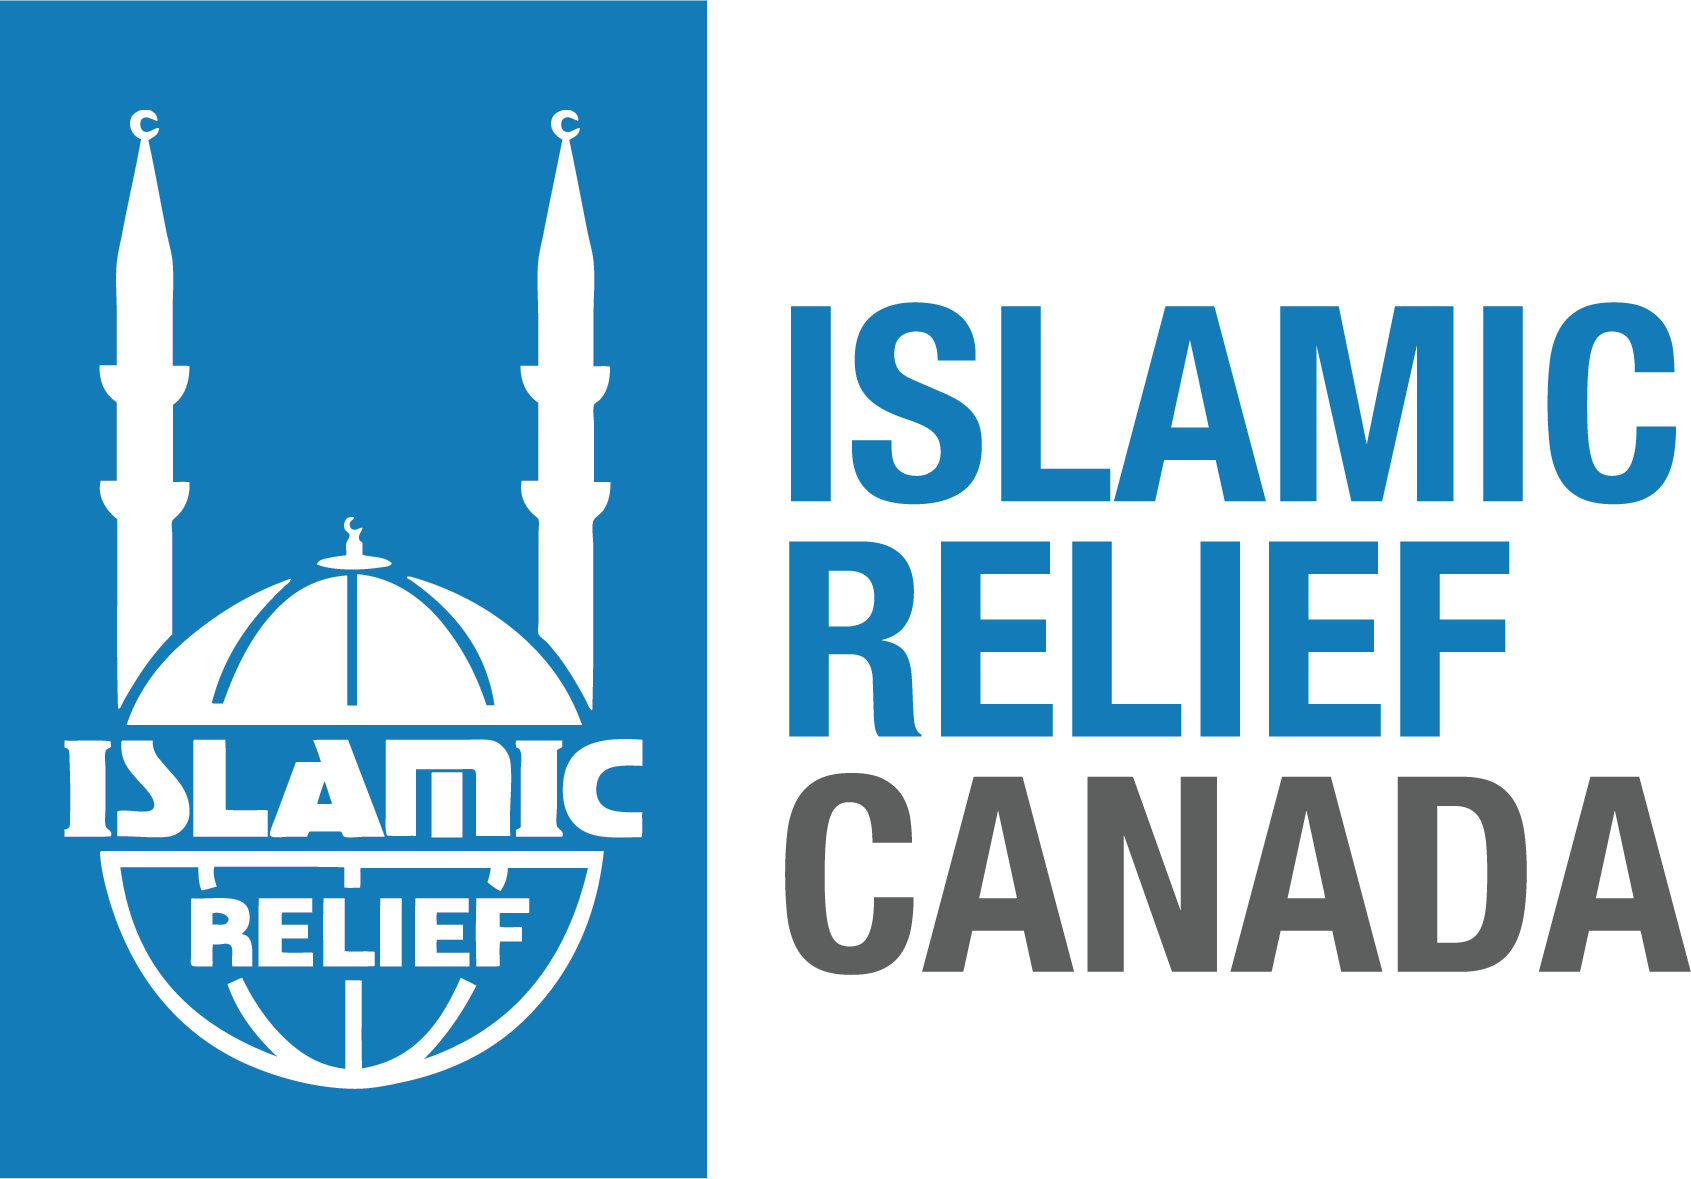 Islamic-Relief-Canada-logo.png